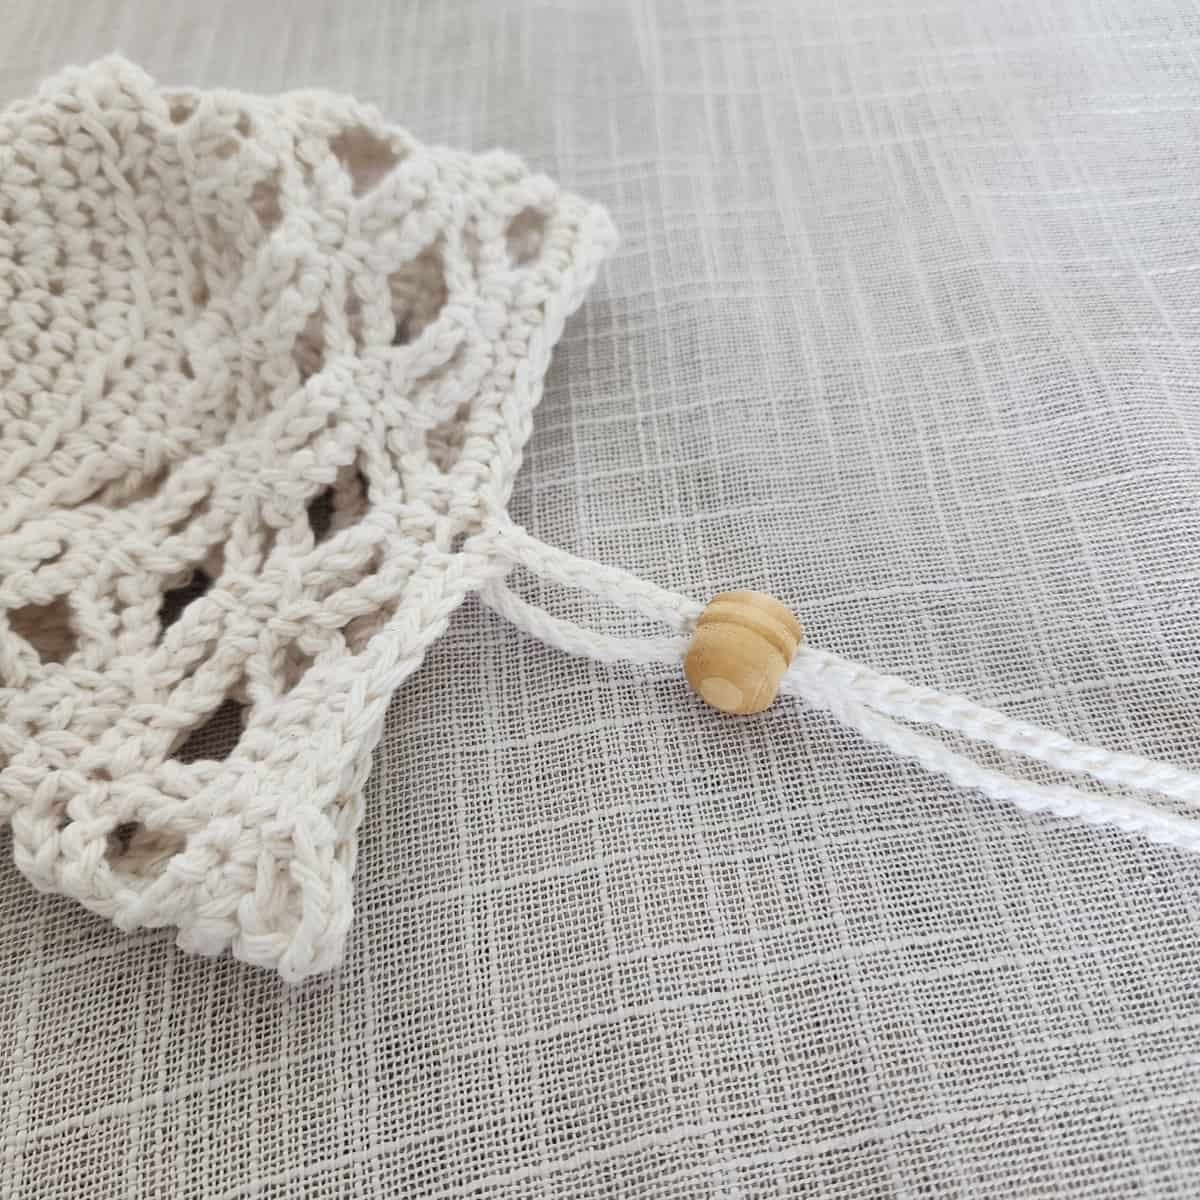 Close up of crochet plant hanger with wooden bead on the hanging strap.